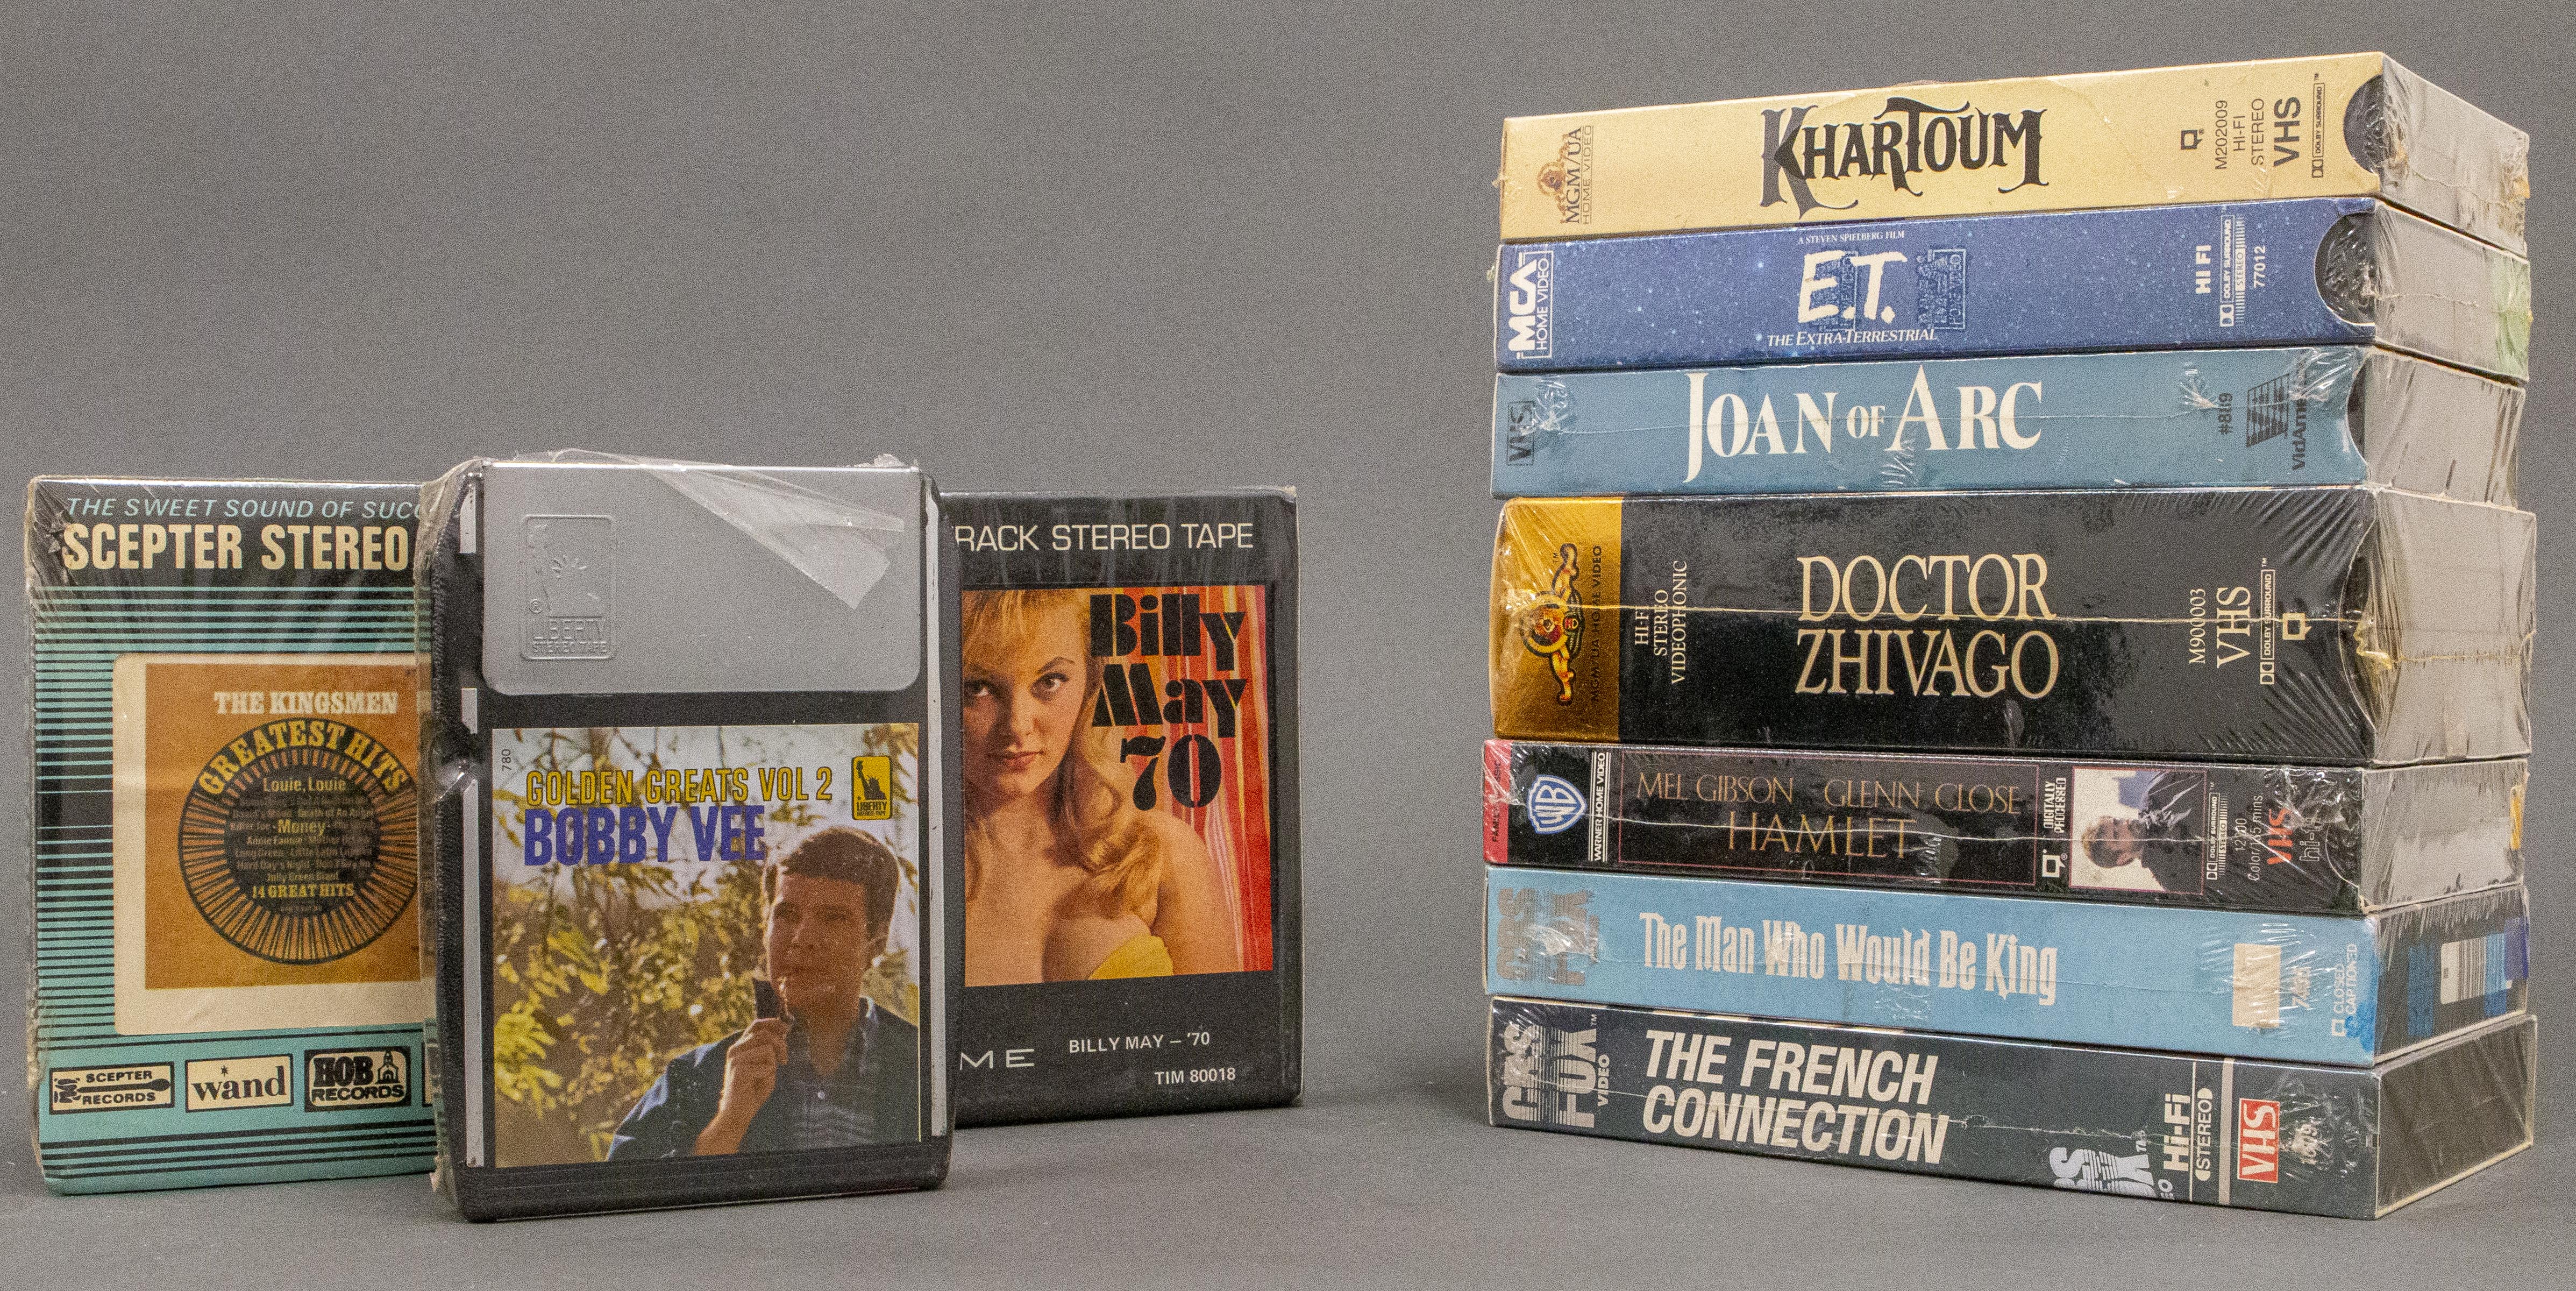 CLASSIC VHS MOVIES AND 8 TRACK 3c4c9a